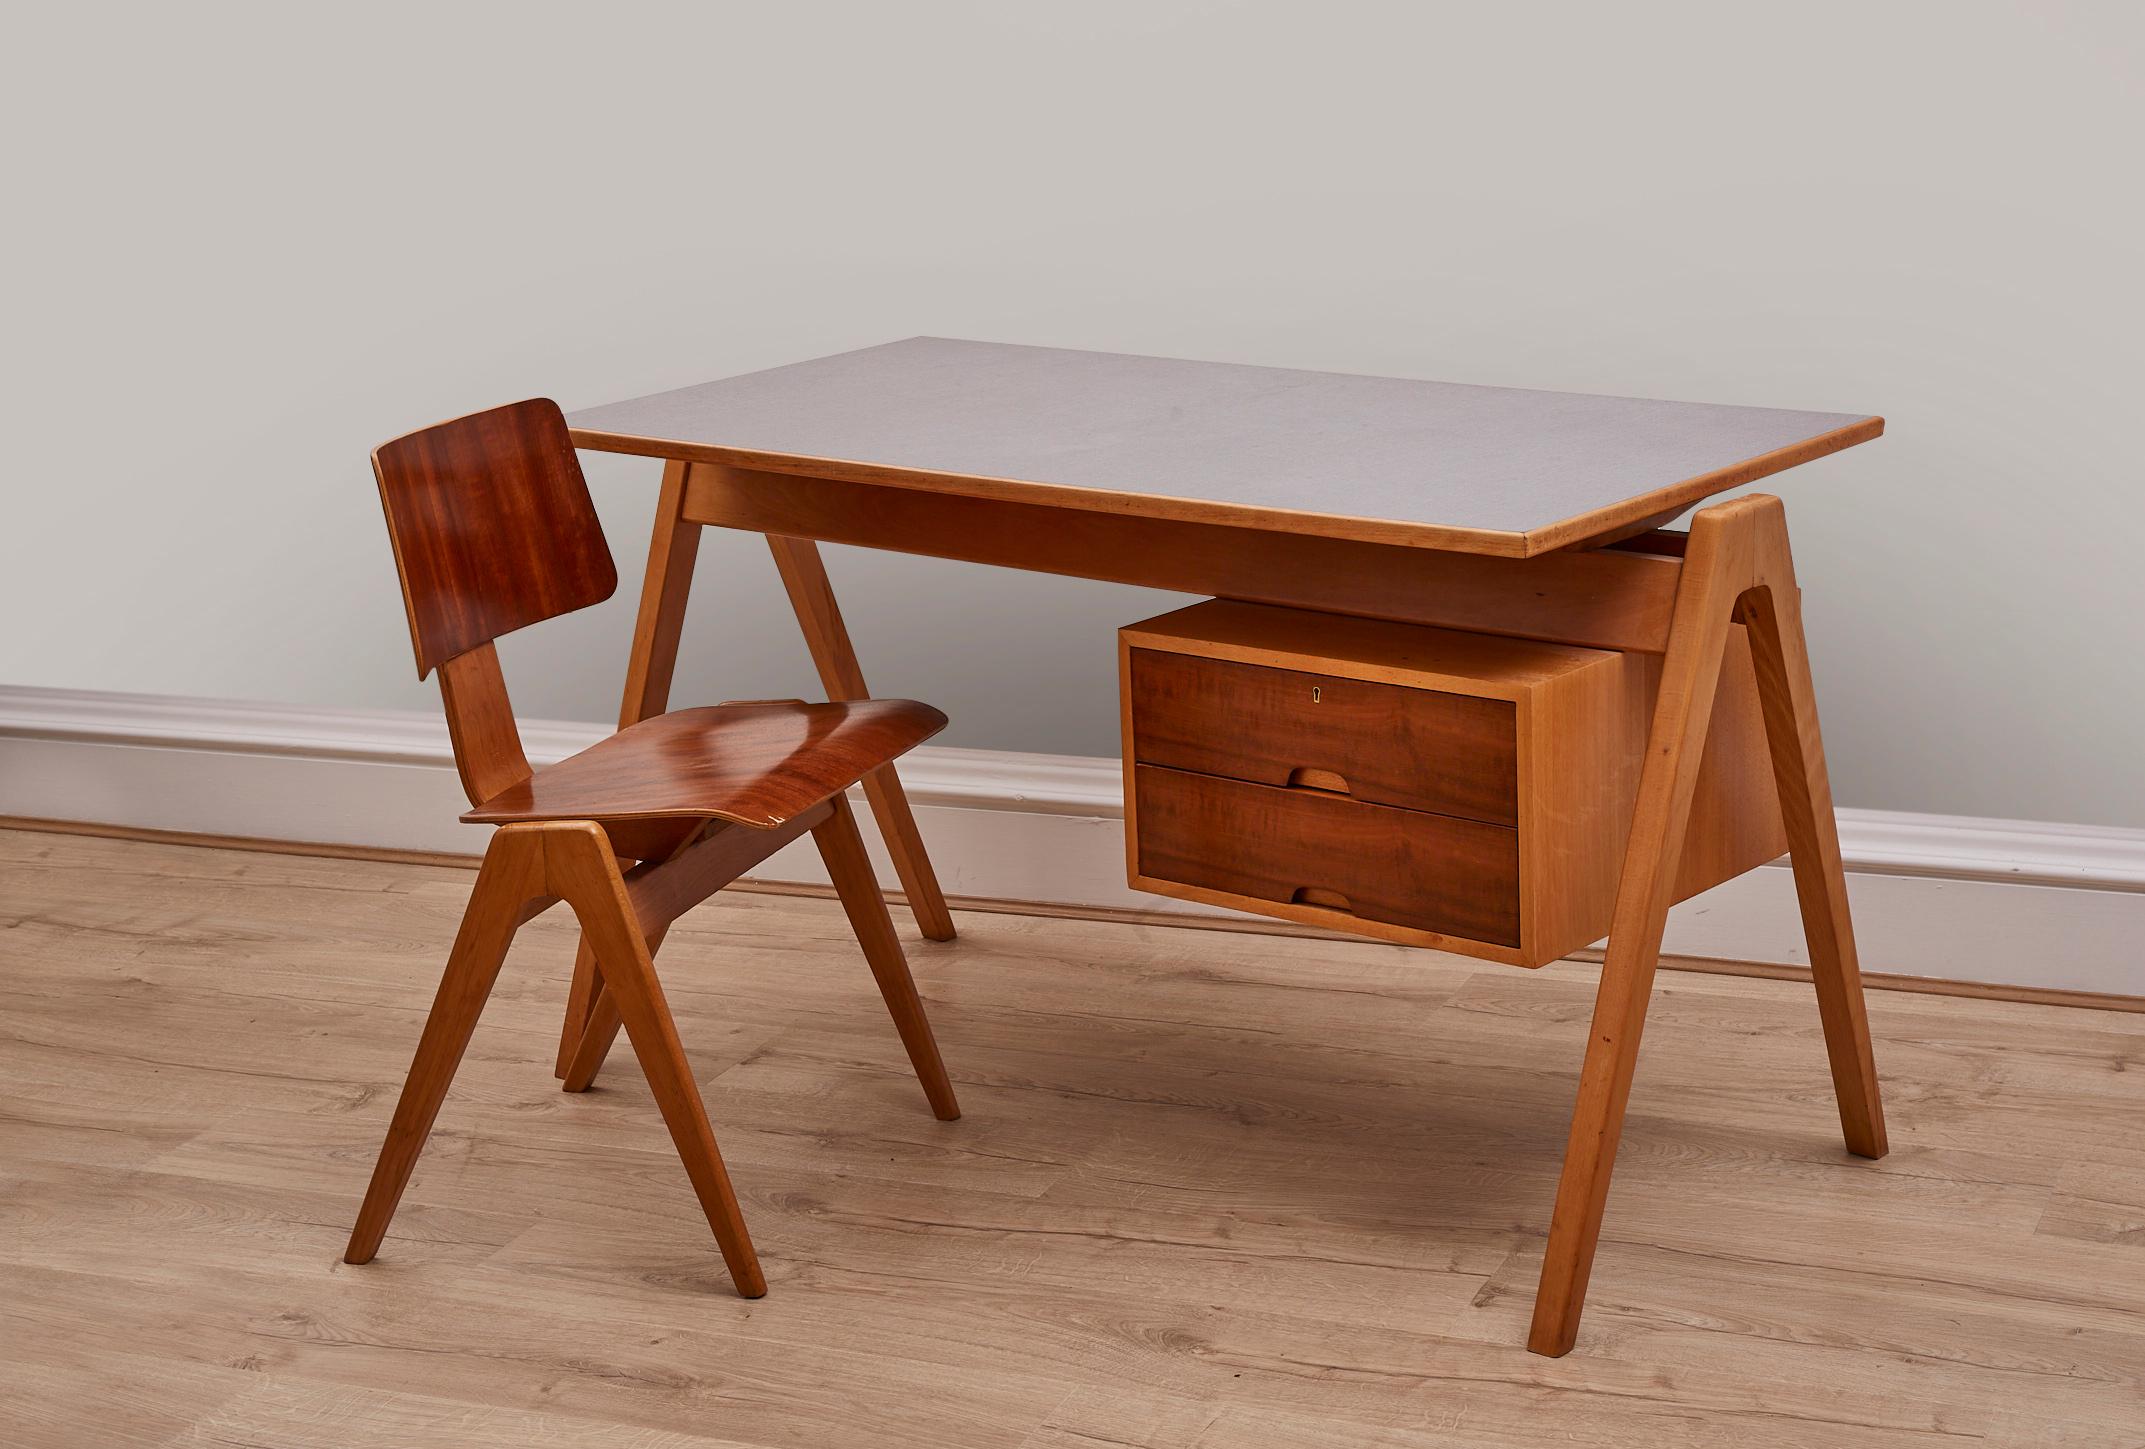 1950s Writing desk, made for Hille, Beechwood, extremely good vintage condition
 
About the designer: 
Robin Day was an iconic British industrial designer, best known for his injection-moulded polypropylene stacking chairs – more than 20 million of